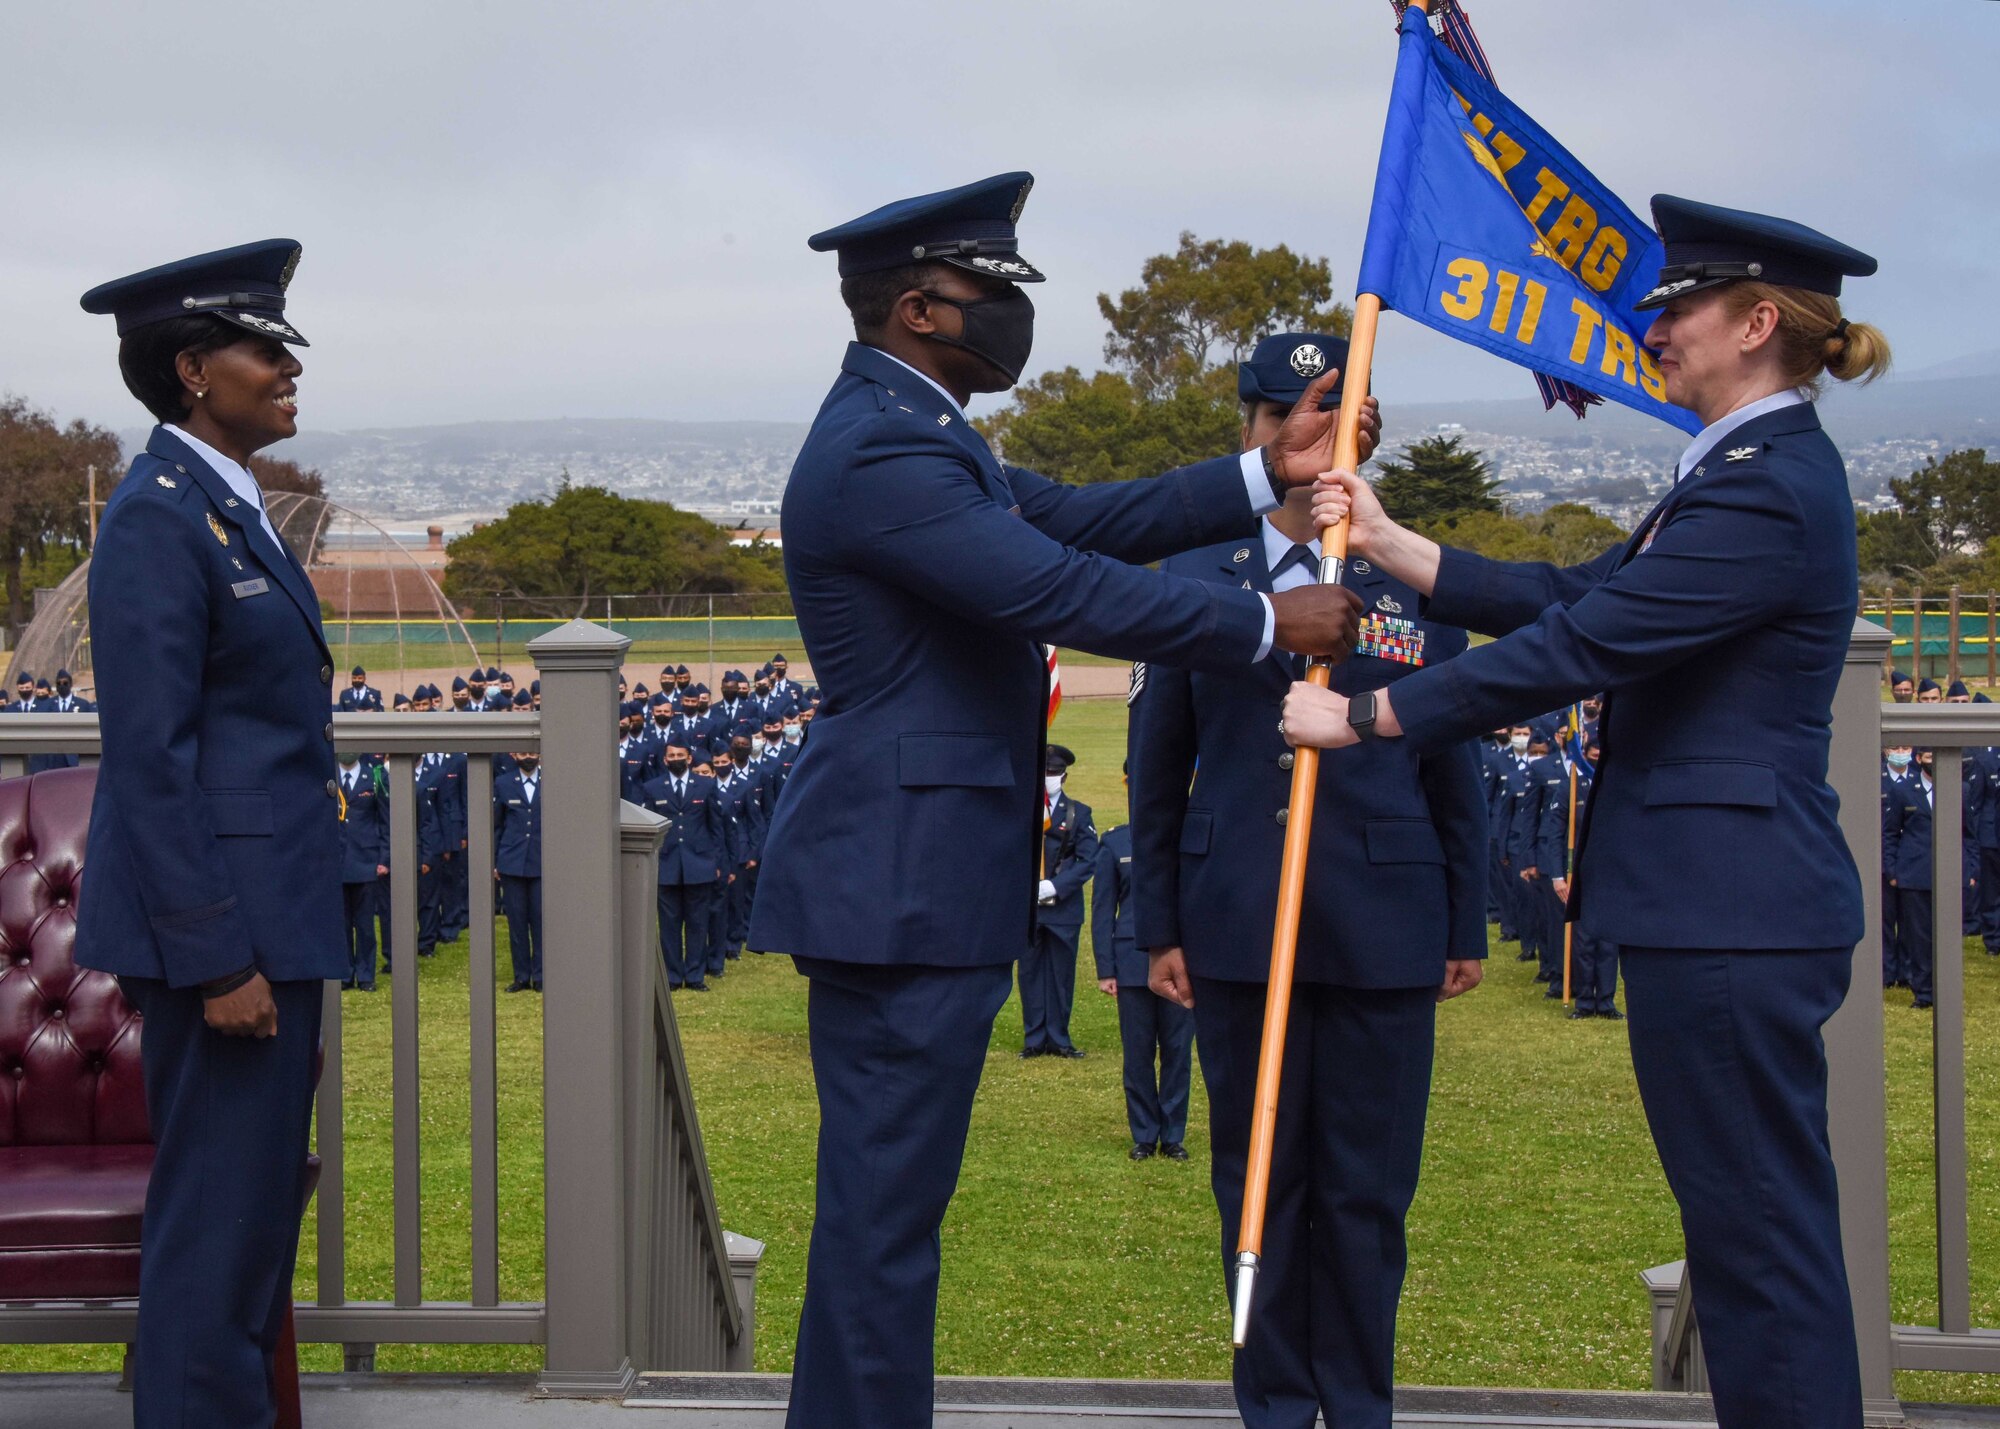 U.S. Air Force Lt. Col. William Taylor, incoming 311th Training Squadron commander, receives the guidon, a symbol of command, from Col. Stephanie Kelley, assistant commandant and commander of the 517th Training Group at the change of command ceremony at Soldier Field, Presidio of Monterey, California, June 4, 2021. Taylor comes to the Presidio of Monterey from the National Air and Space Intelligence Center, Ramstein Air Base, Germany. (Photo courtesy of Natela Cutter)